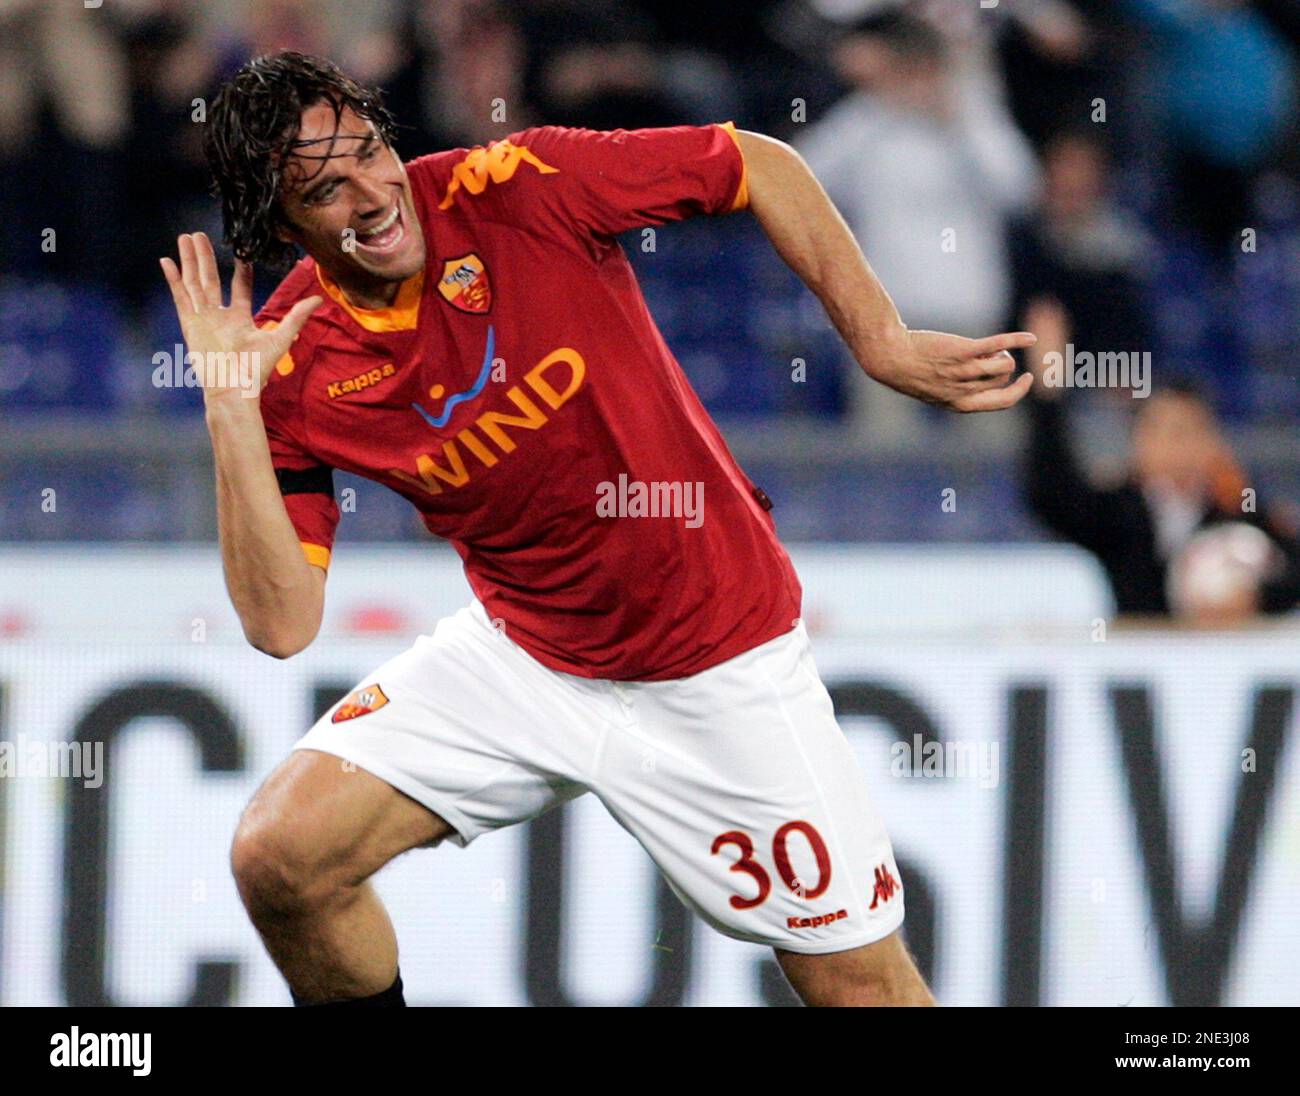 AS Roma forward Luca Toni celebrates past Udinese defender Giovanni  Pasquale, left, after scoring during a Serie A soccer match between AS Roma  and Udinese at Rome's Olympic stadium, Saturday, March 20,